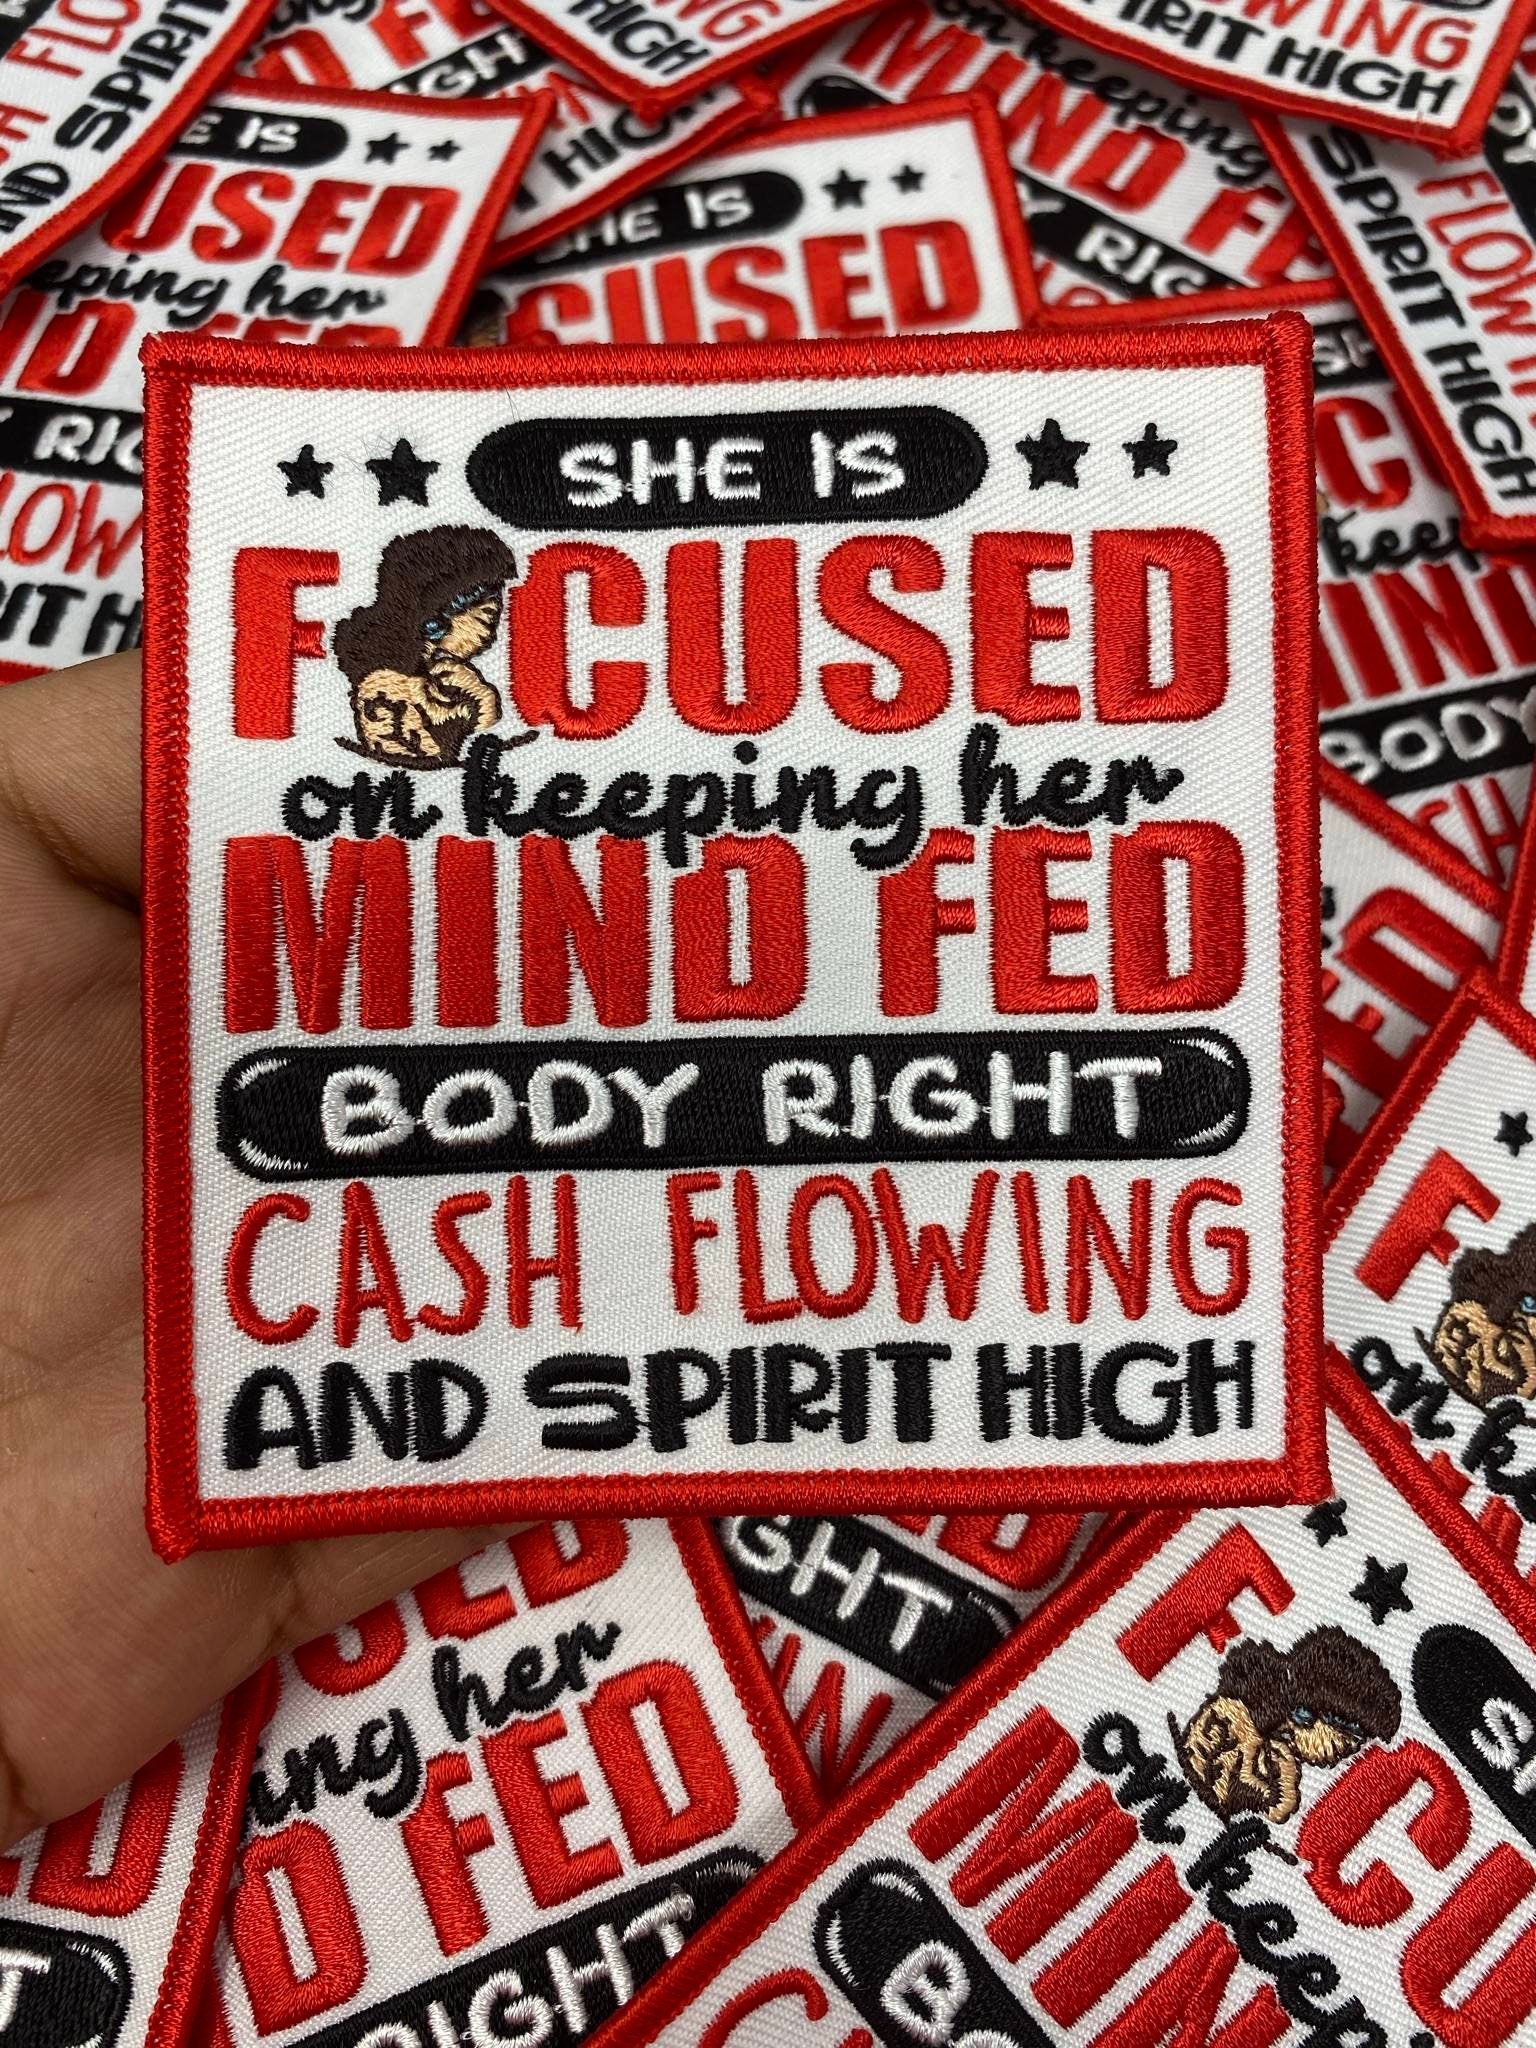 New, EXCLUSIVE: "She is Focused on Keeping Her Mind Fed" Statement Patch, DIY Embroidered, Iron-On Patch, Size 5", Patch for Jackets & More